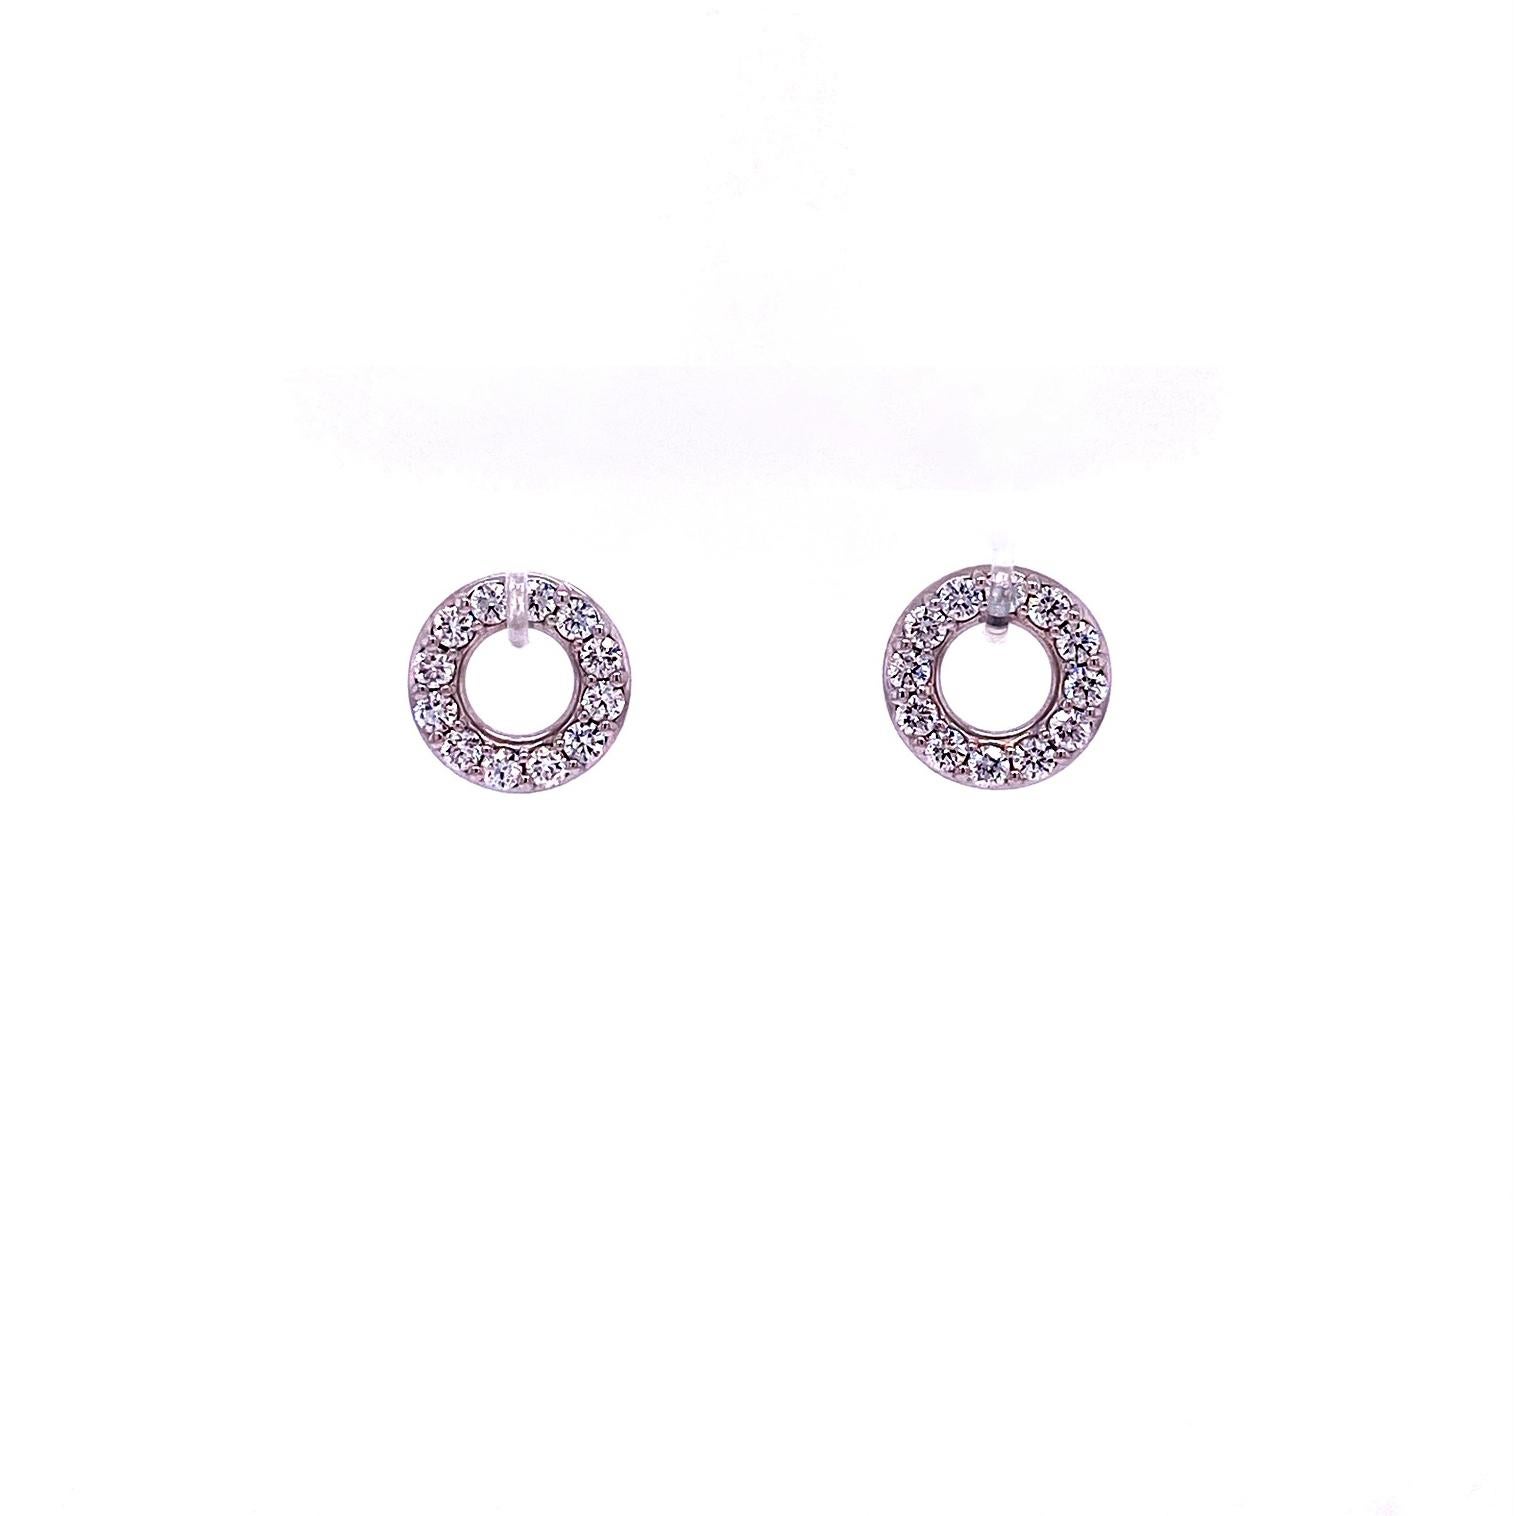 Cabochon 18 Karat White Gold White Diamond Hoops with Grey Moonstone Earring Jackets